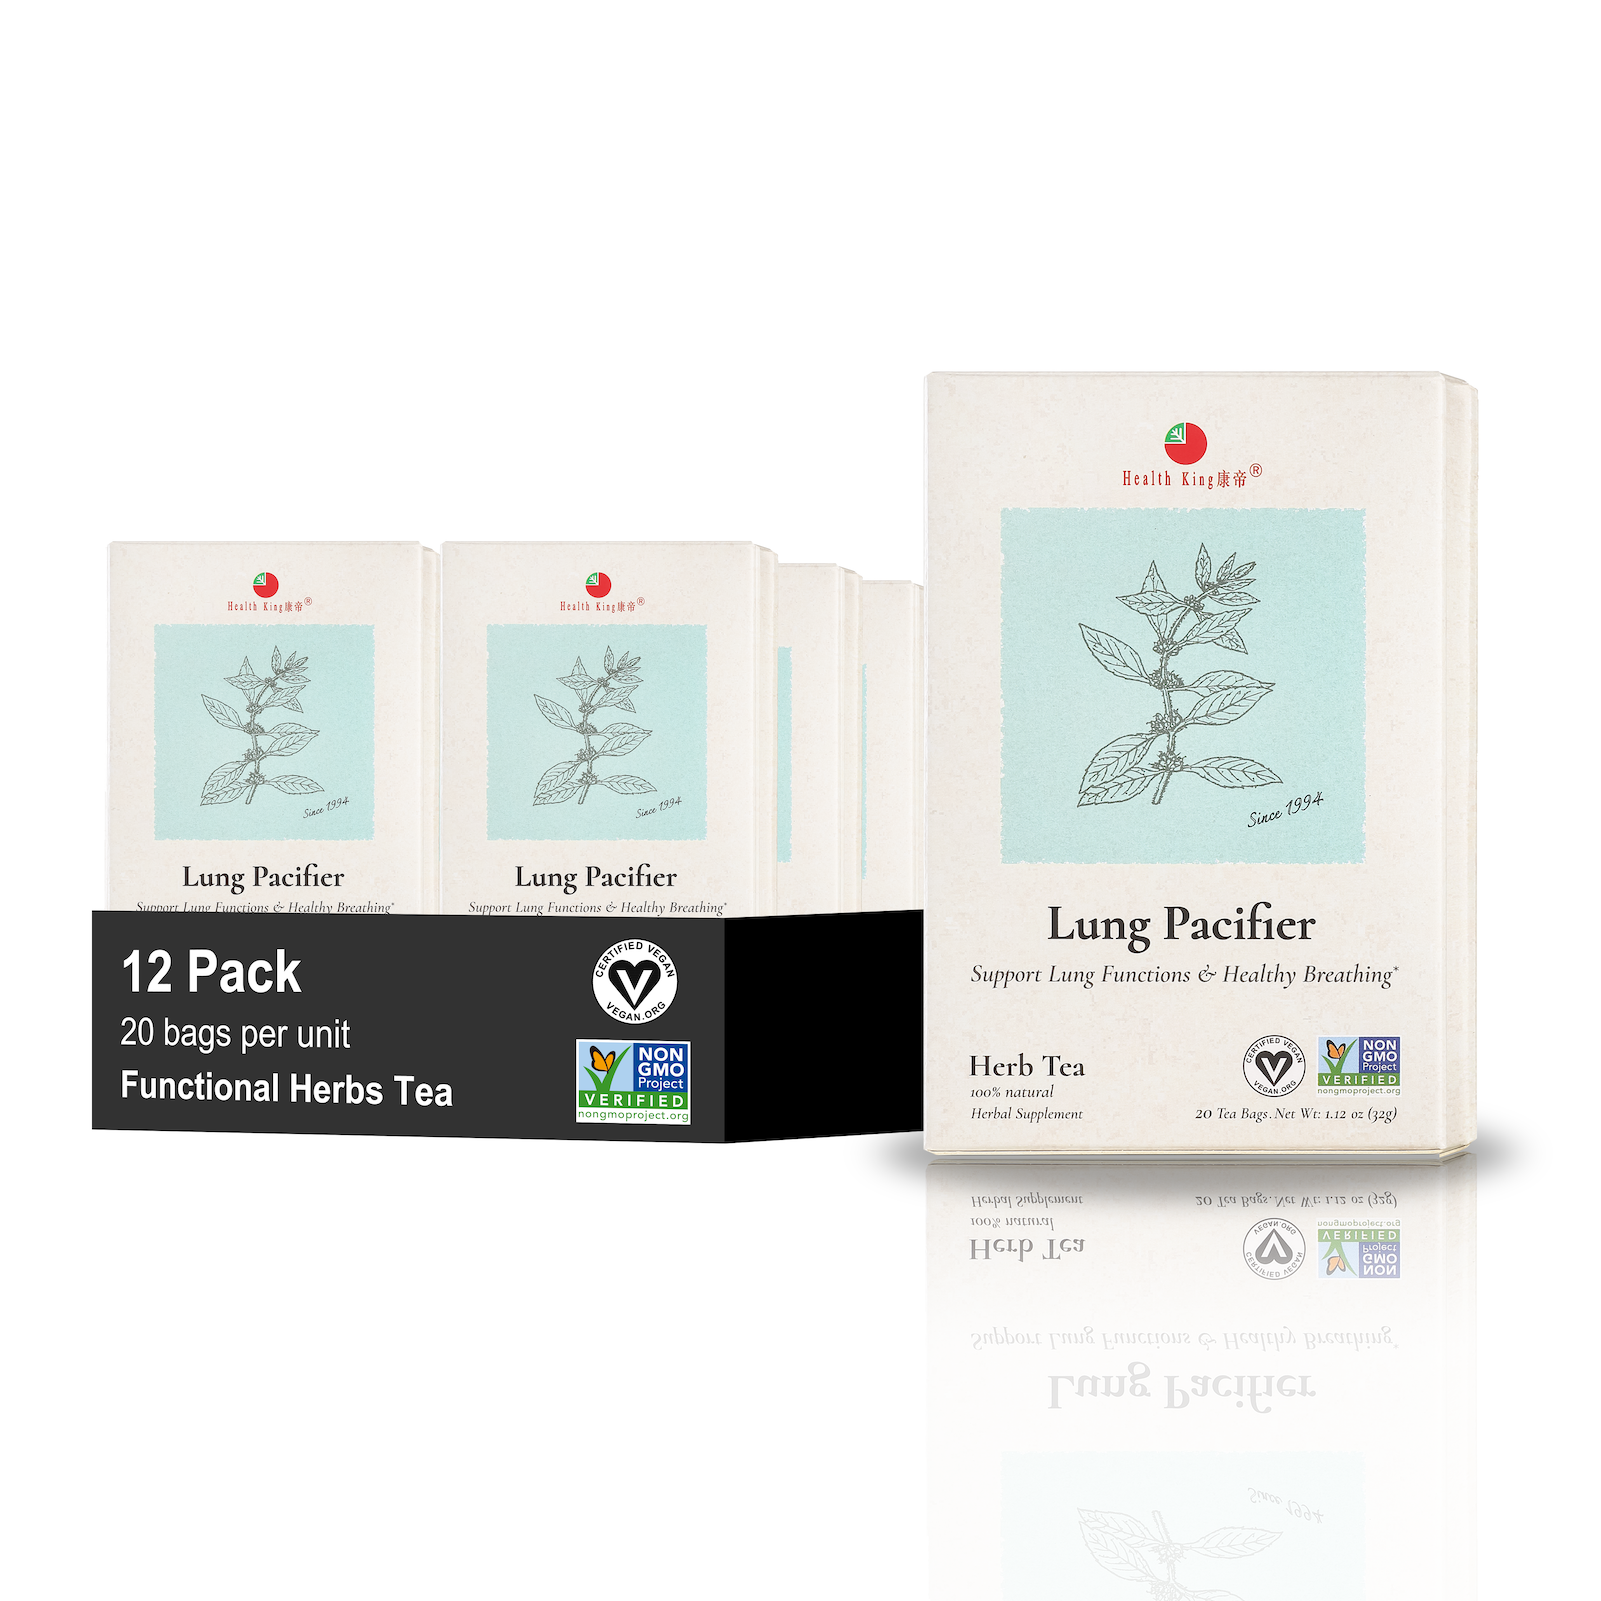 Twelve-pack of Lung Pacifier Herb Tea designed to aid breathing